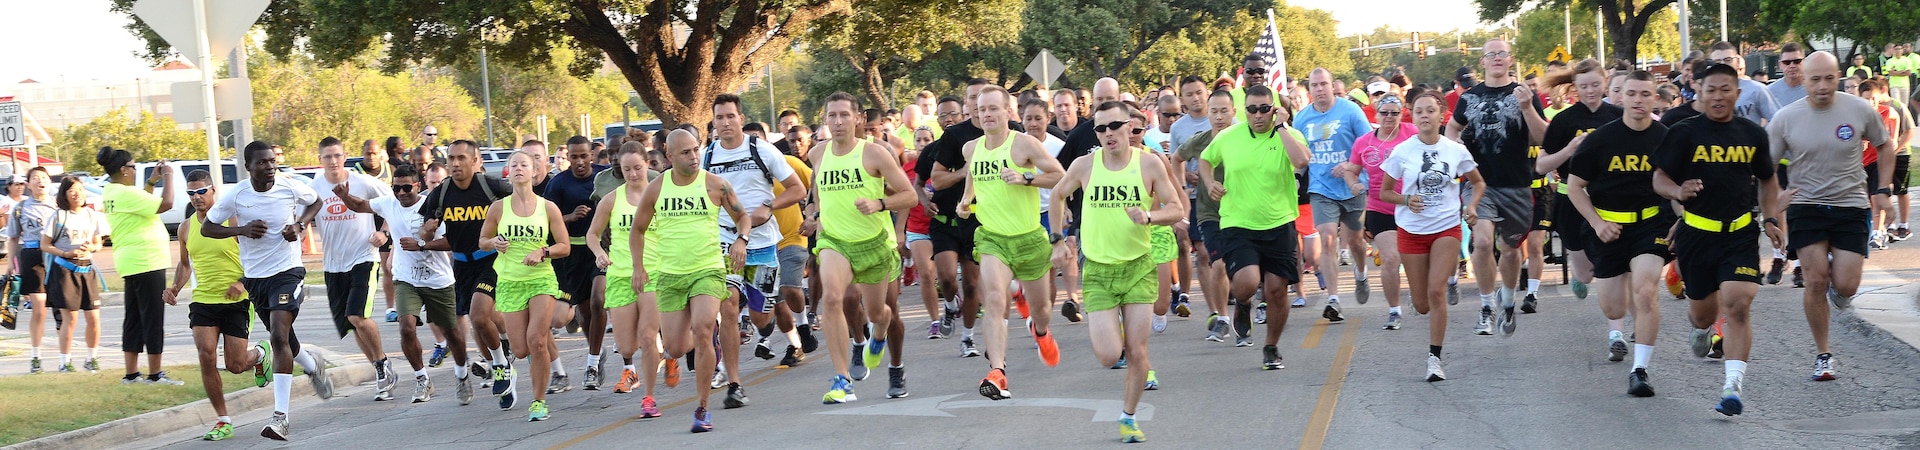 Hundreds of military members, civilian personnel and family members run down Stanley Road during the 2015 5K Run For Life at JBSA-Fort Sam Houston Sunday. Another run took place at Eberle Park on JBSA-Randolph Saturday and the final run is at the Gillum Fitness Center on JBSA-Lackland, with free registration at 7 a.m. and the run beginning at 8 a.m. Sept. 26. The events promote awareness of the resources available to assist service members and their families with fitness, resiliency and suicide prevention. The top three male and female runners will win awards and all participants receive an “I Run For Life” reflective belt and finisher’s dog tag, while supplies last. For more information, visit http://www.facebook.com/JBSArunforlife and http://www.facebook.com/JointBaseSanAntonio.